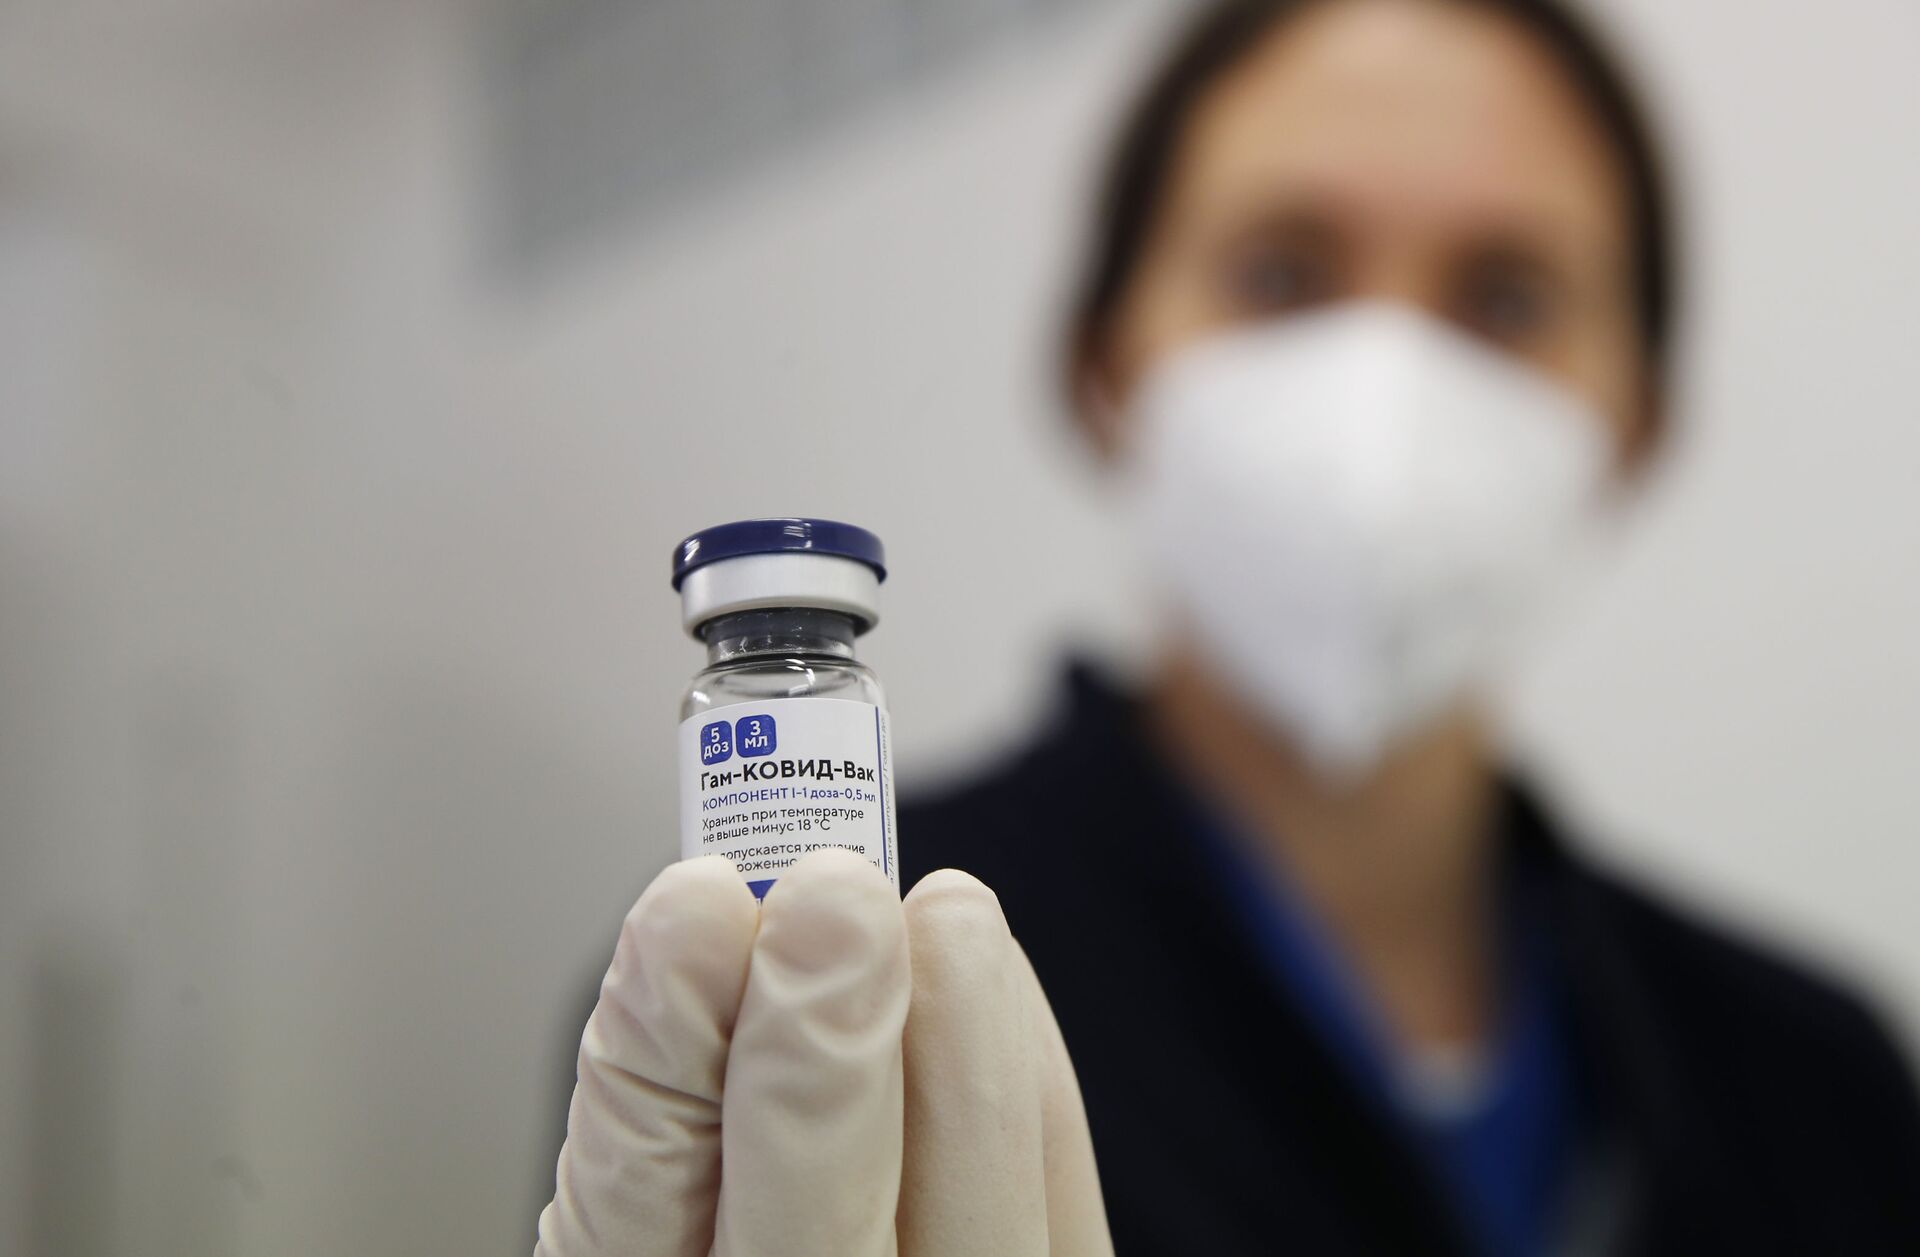 A medical worker holds a vial of Russia's Sputnik V vaccine for COVID-19, at the San Marino State Hospital, in San Marino, Friday, April 9, 2021 - Sputnik International, 1920, 07.09.2021